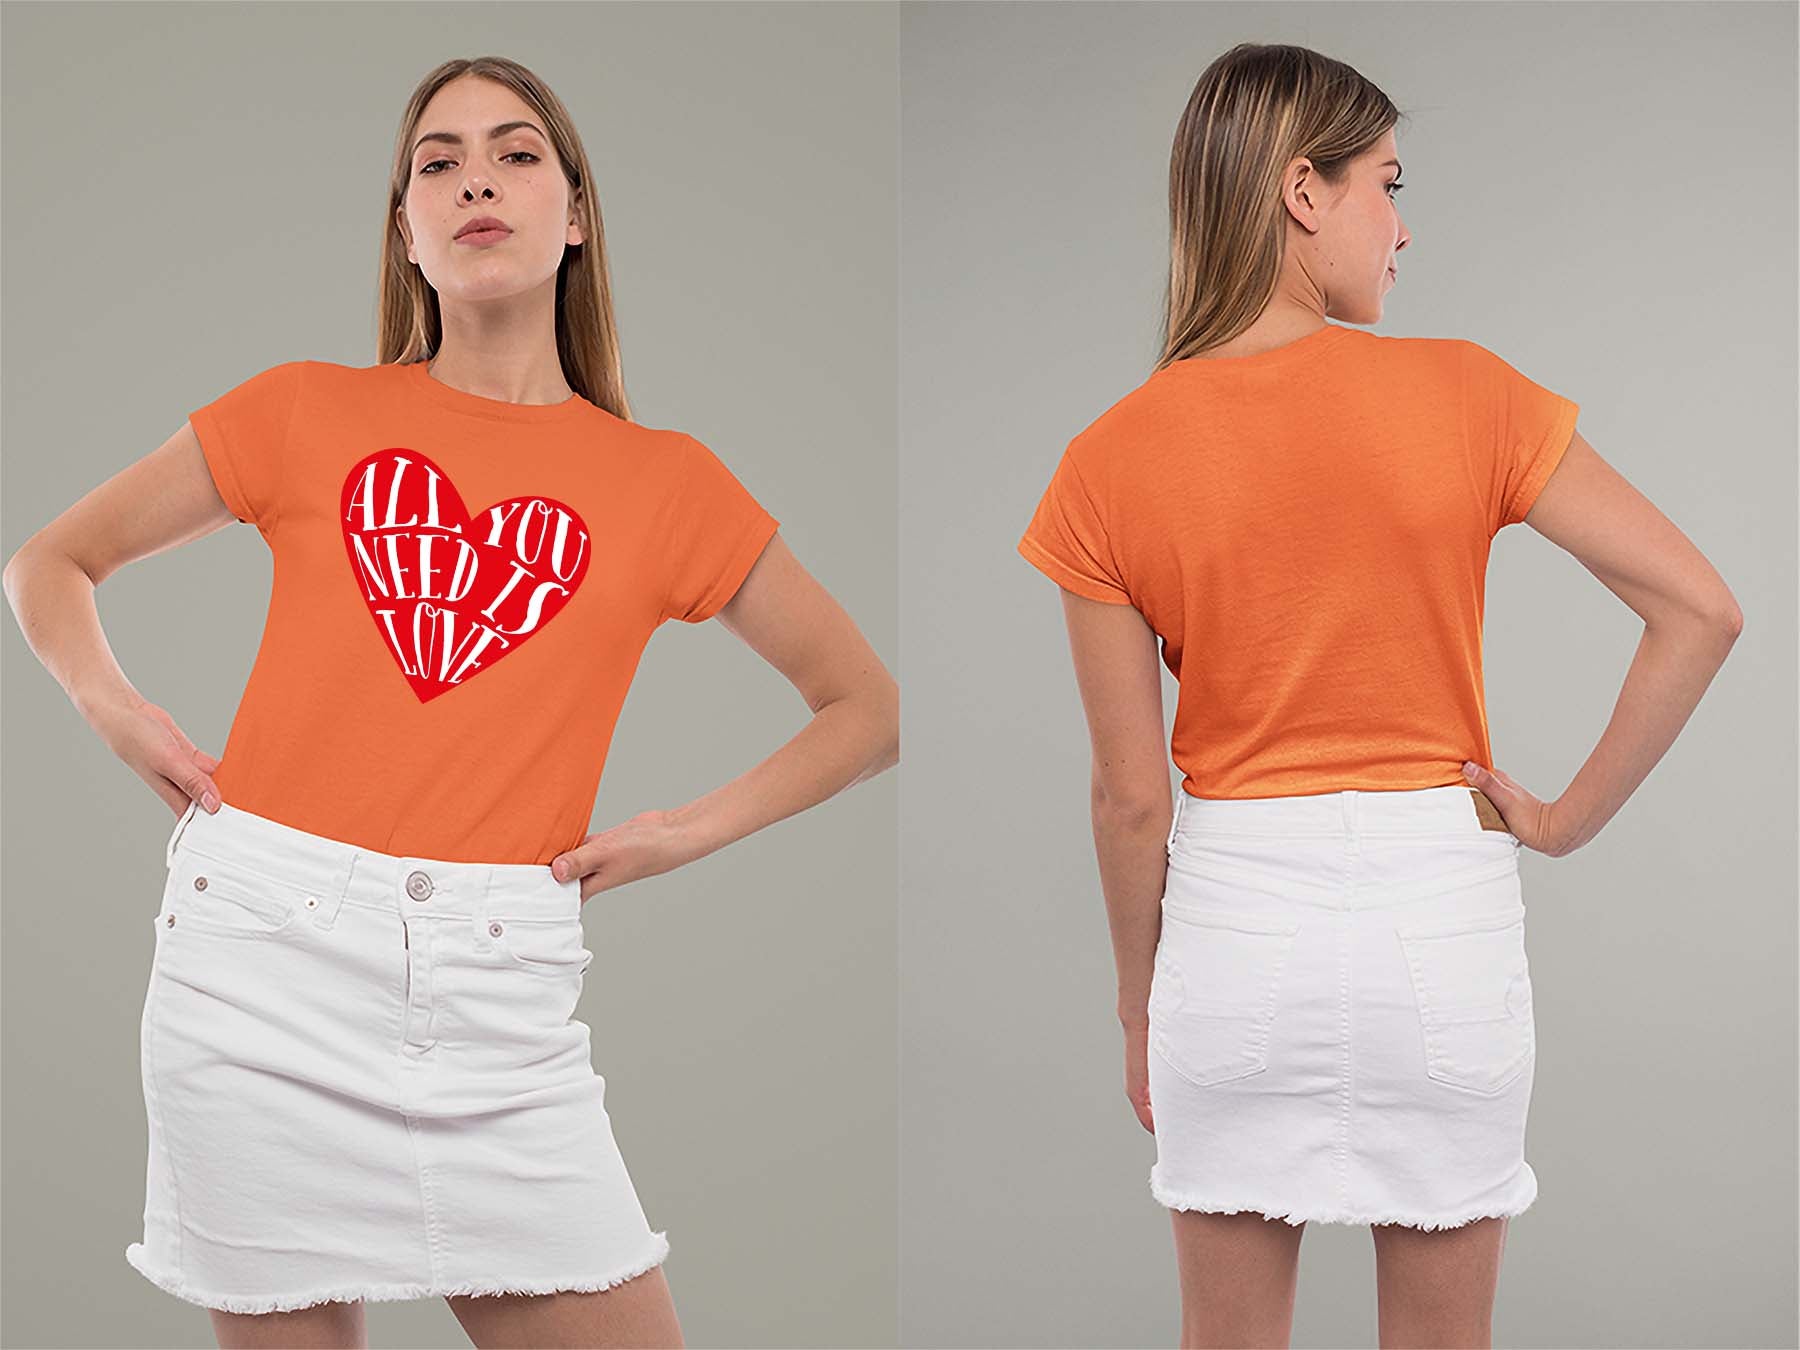 Fat Dave All You Need is Love Ladies Crew (Round) Neck Shirt Small Orange